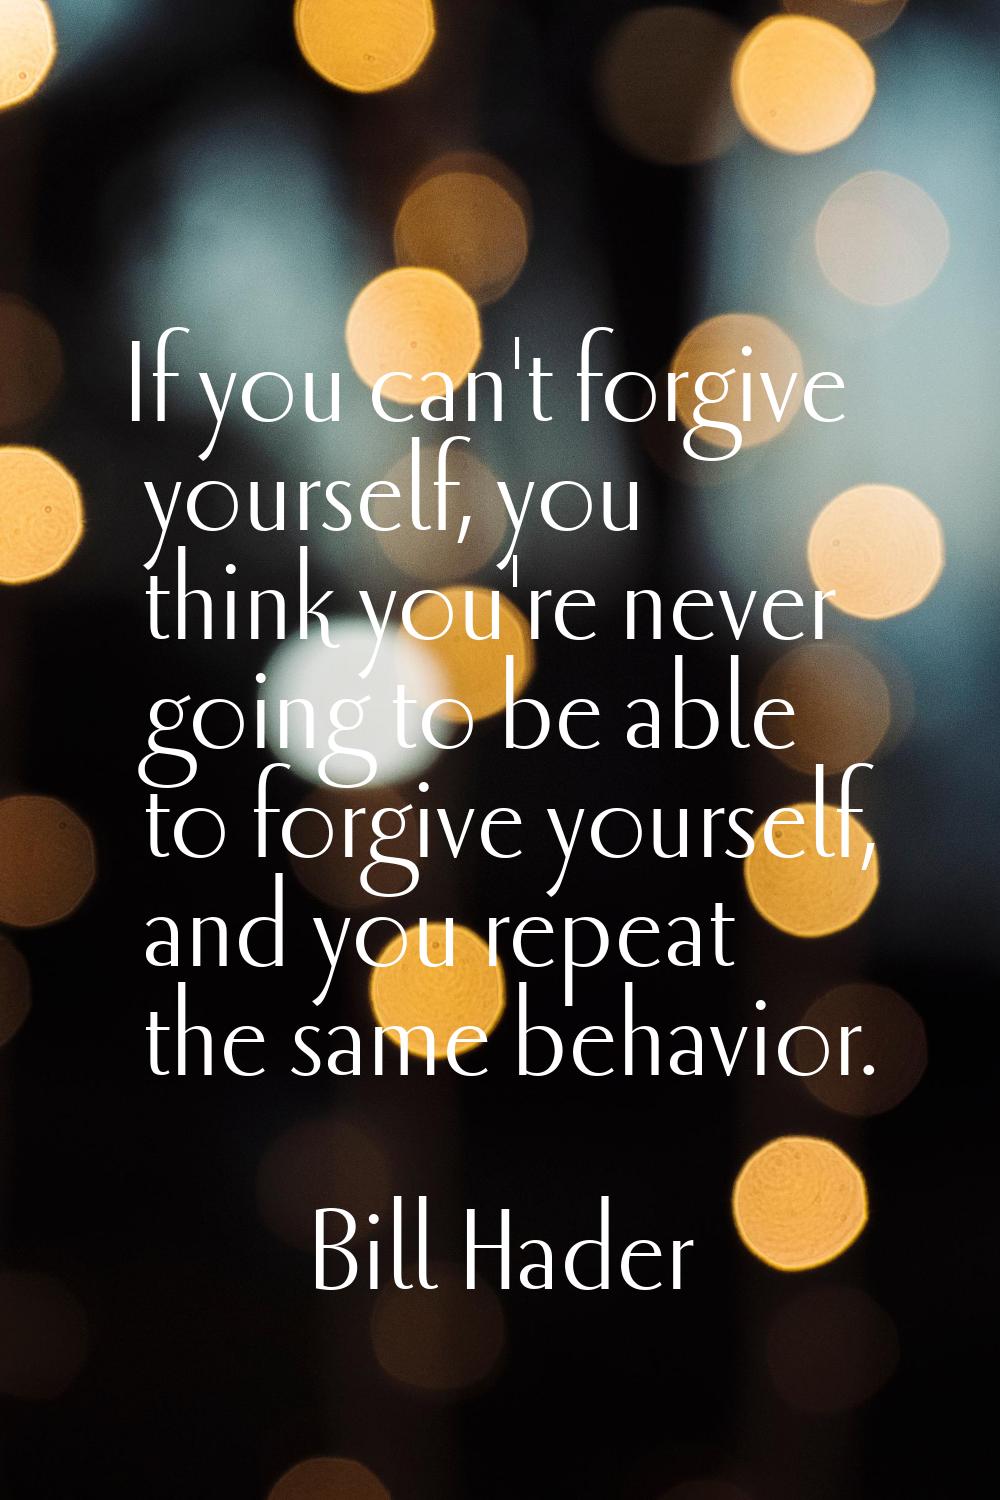 If you can't forgive yourself, you think you're never going to be able to forgive yourself, and you